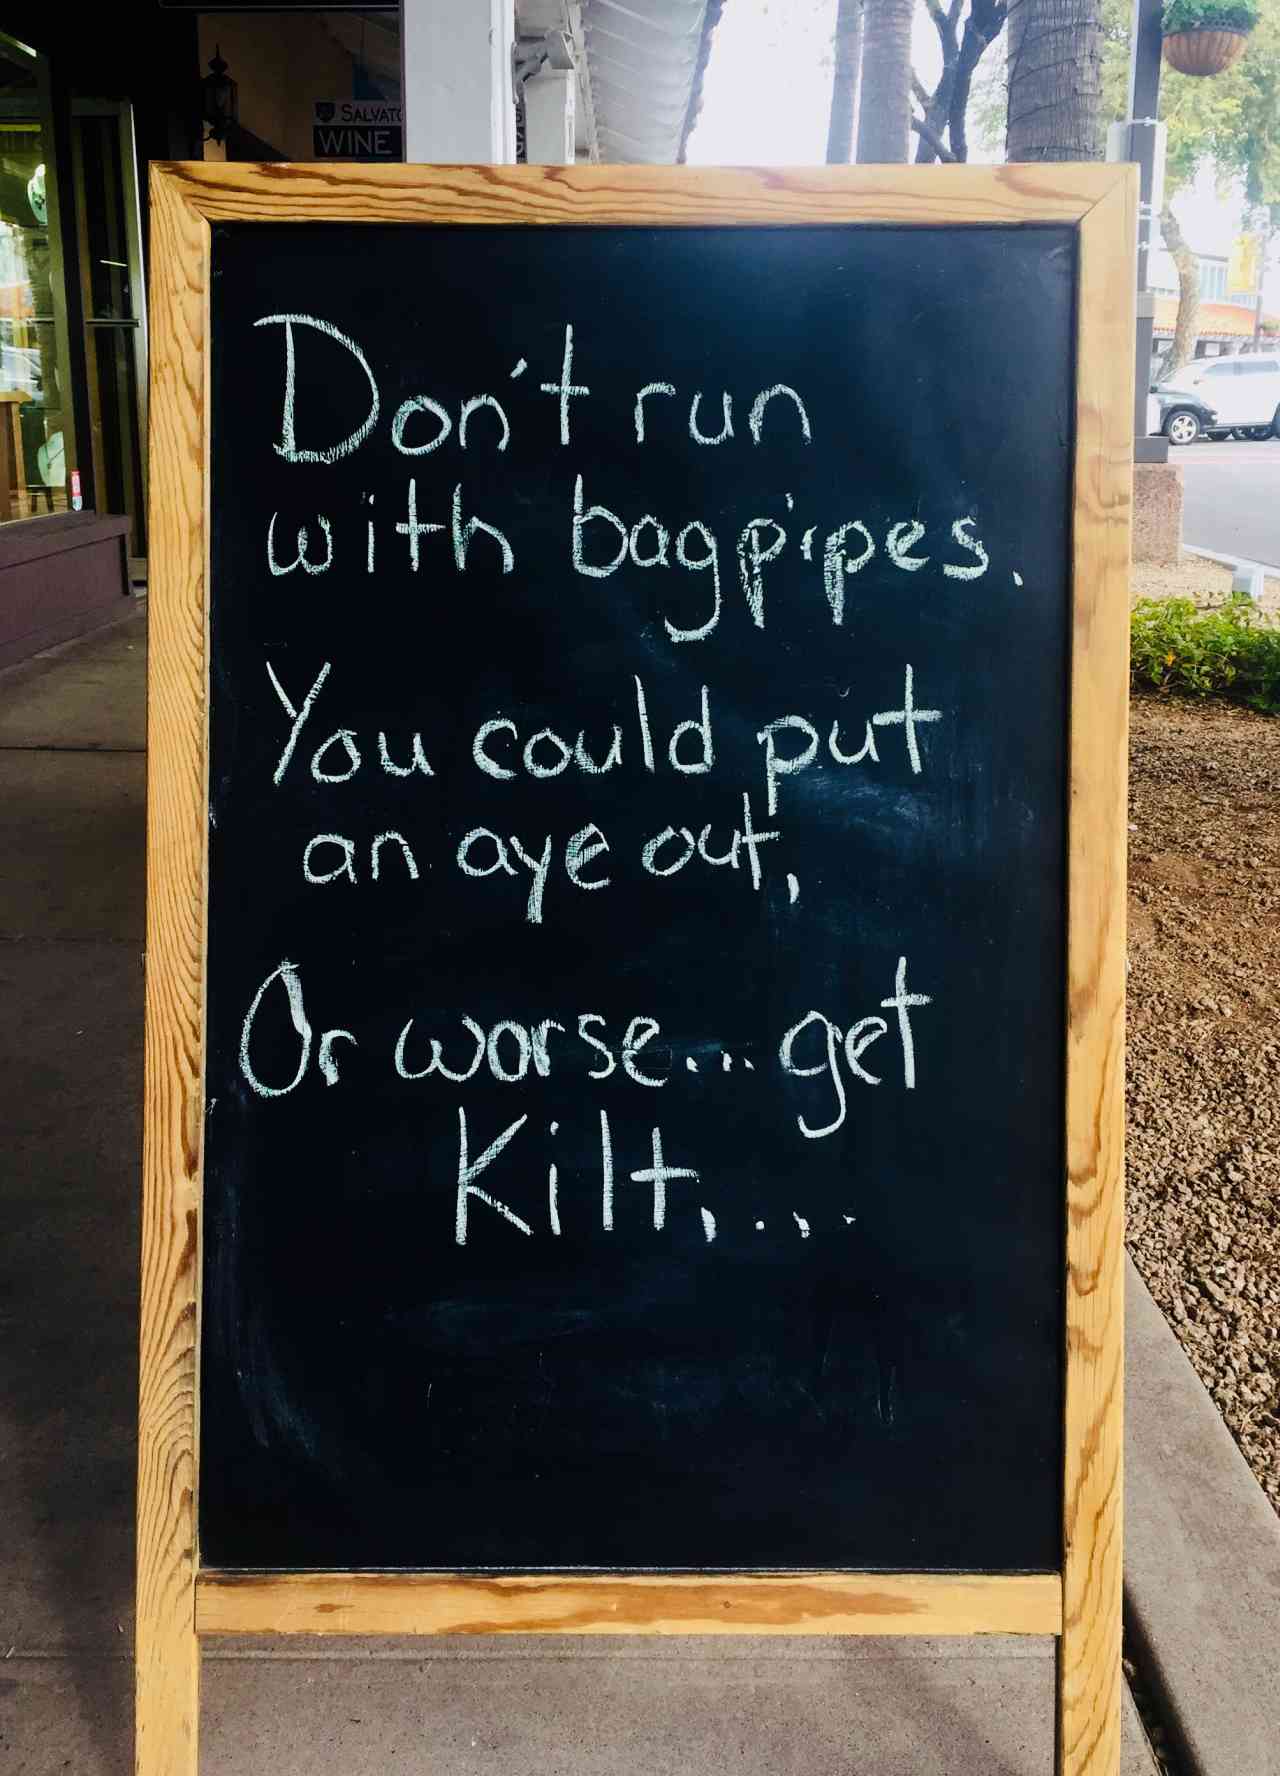 chalkboard-sign-with-funny-puns-outside-a-small-bu-2022-11-16-00-04-45-utc_s.jpg